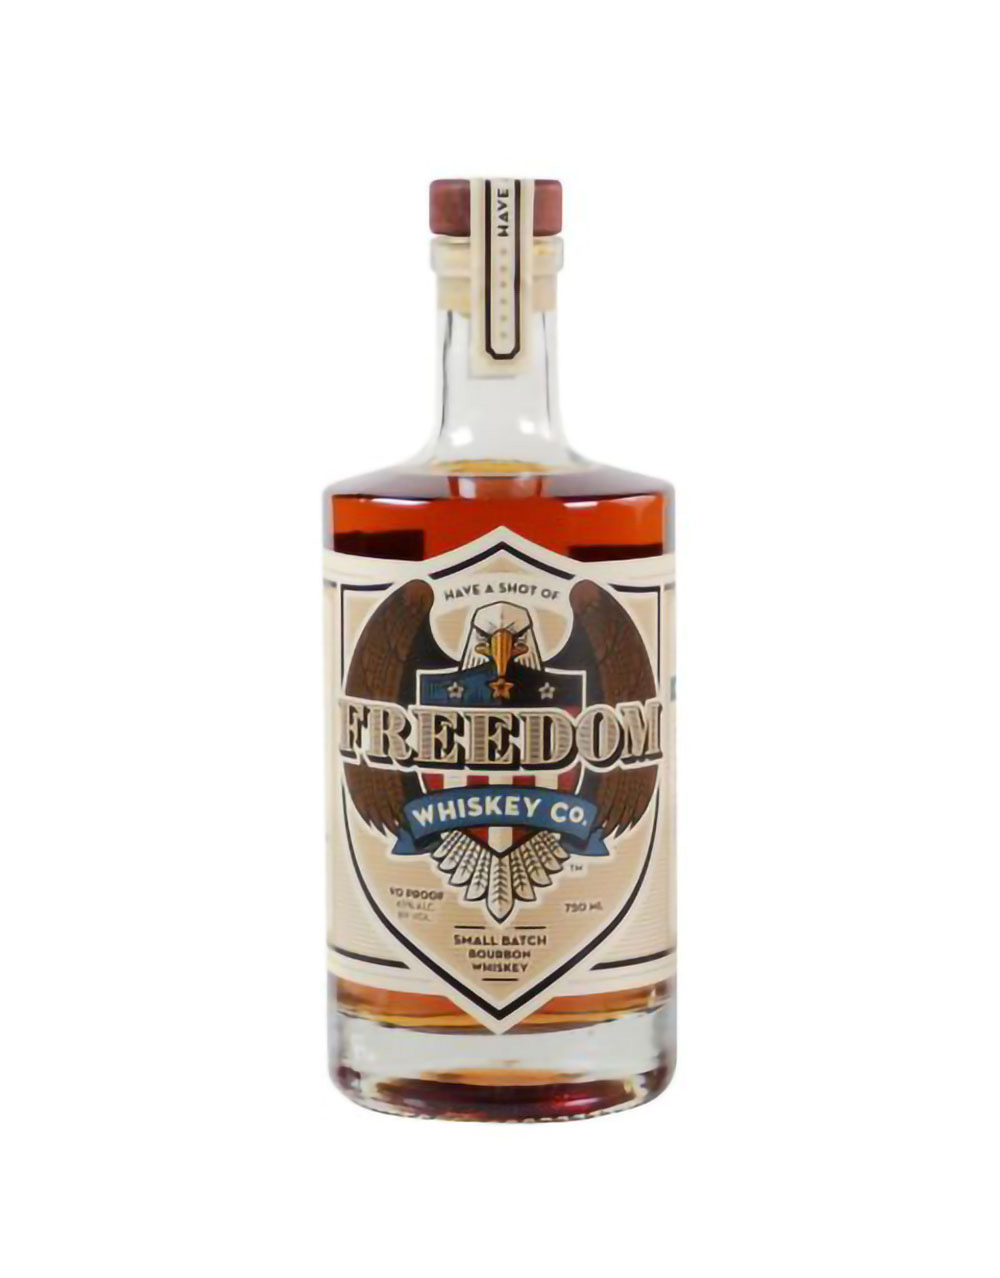 Have a Shot of Freedom Whiskey Co. Small Batch Bourbon Whiskey